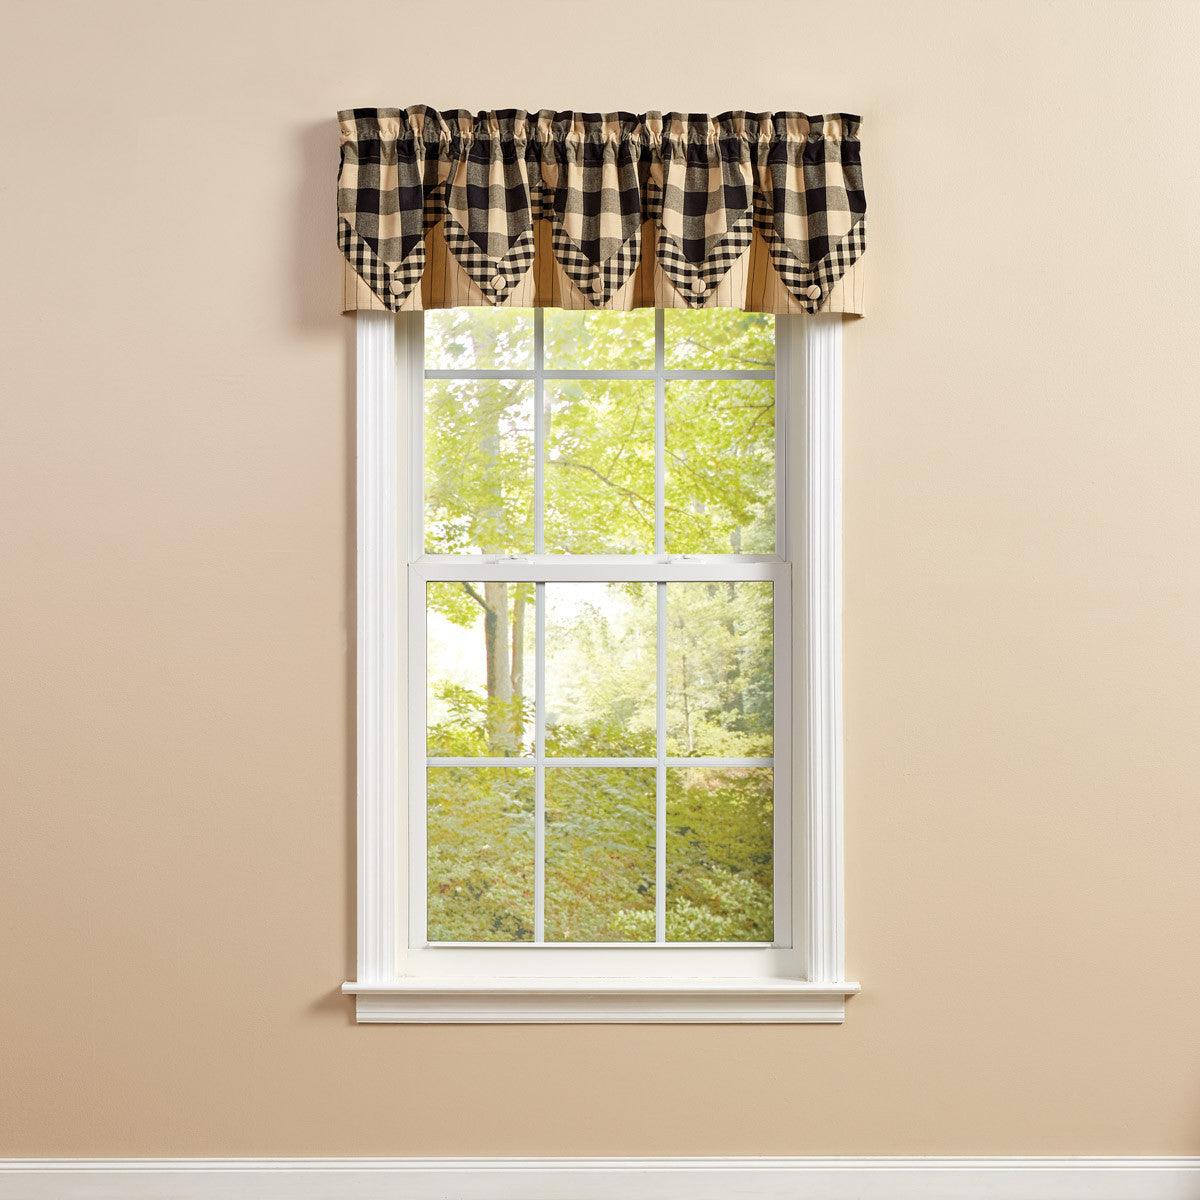 Wicklow Lined Point Valance 15" L - Black Park designs - The Fox Decor